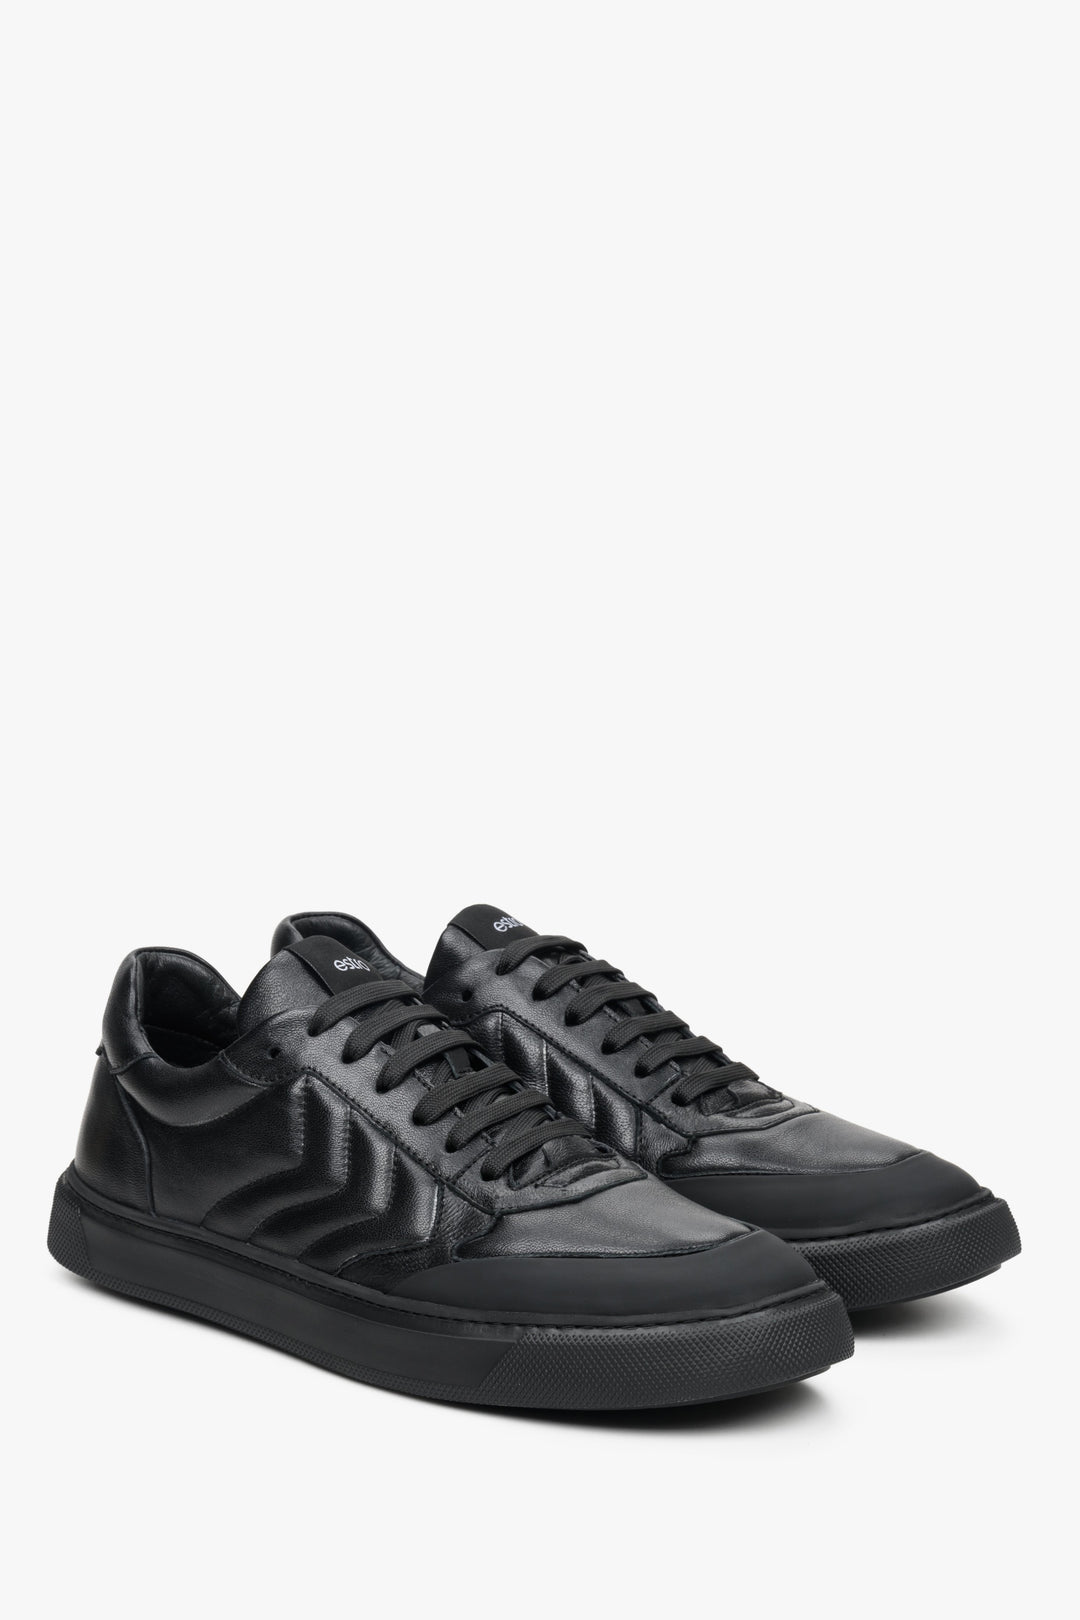 Low, lace-up men's sneakers made from genuine black leather by Estro - close-up of the front part of the shoe.